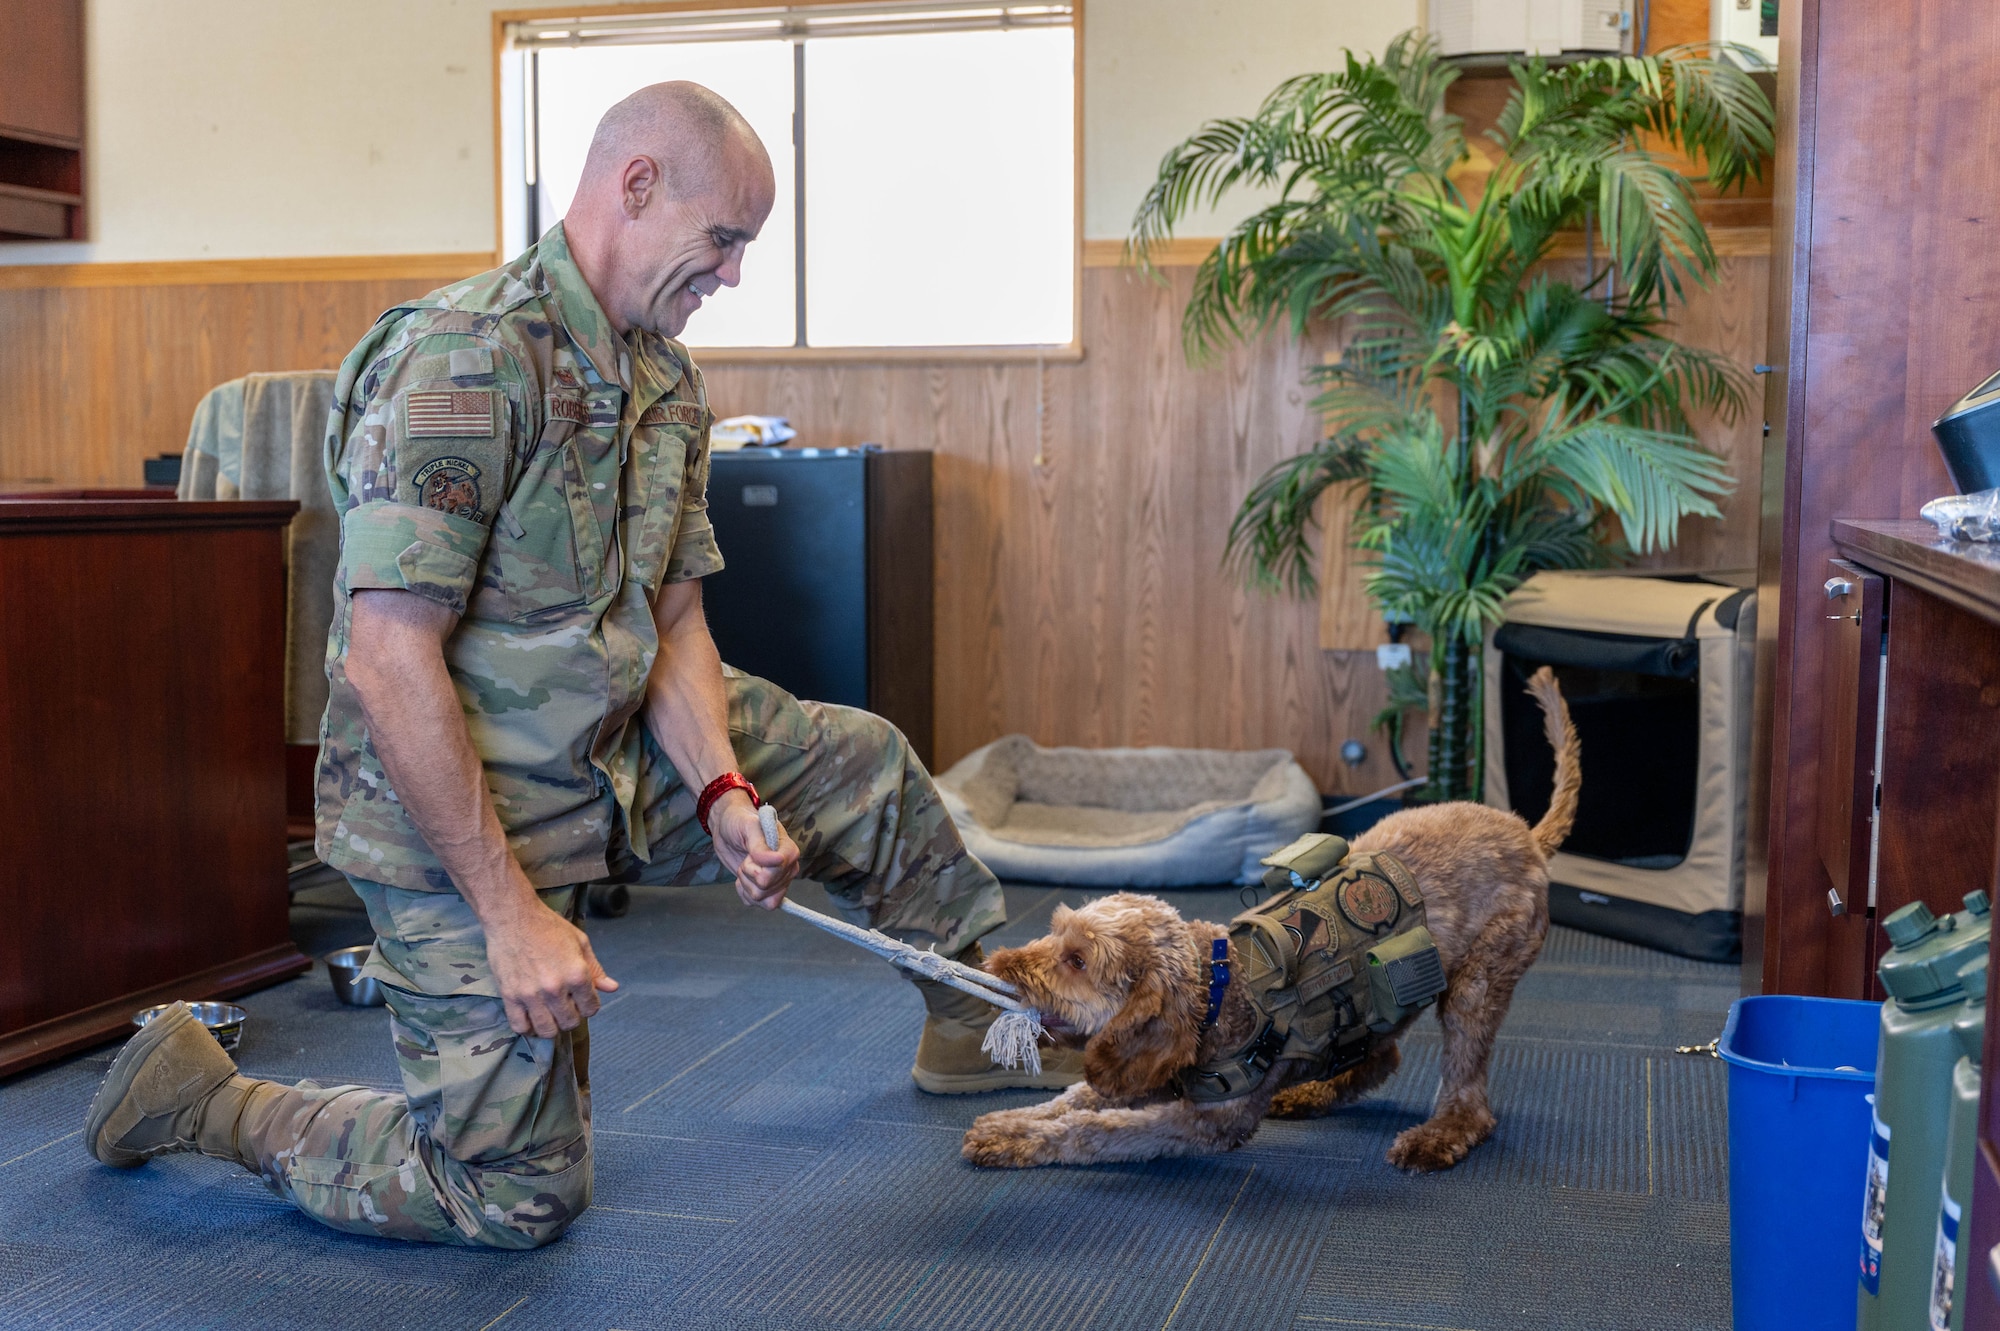 U.S. Air Force Col. Adam Roberts, the 555 RED HORSE Squadron commander, and his service dog, Porsche, take a moment to bond and play tug-of-war at Nellis Air Force base, Nevada, September 20, 2022. Roberts trained Porsche to function as a service animal and to be able to engage with fellow Airmen by accepting vulnerability. (U.S. Air Force photo by Staff Sgt. Timothy Leddick) (this photo has been edited to enhance the subjects)